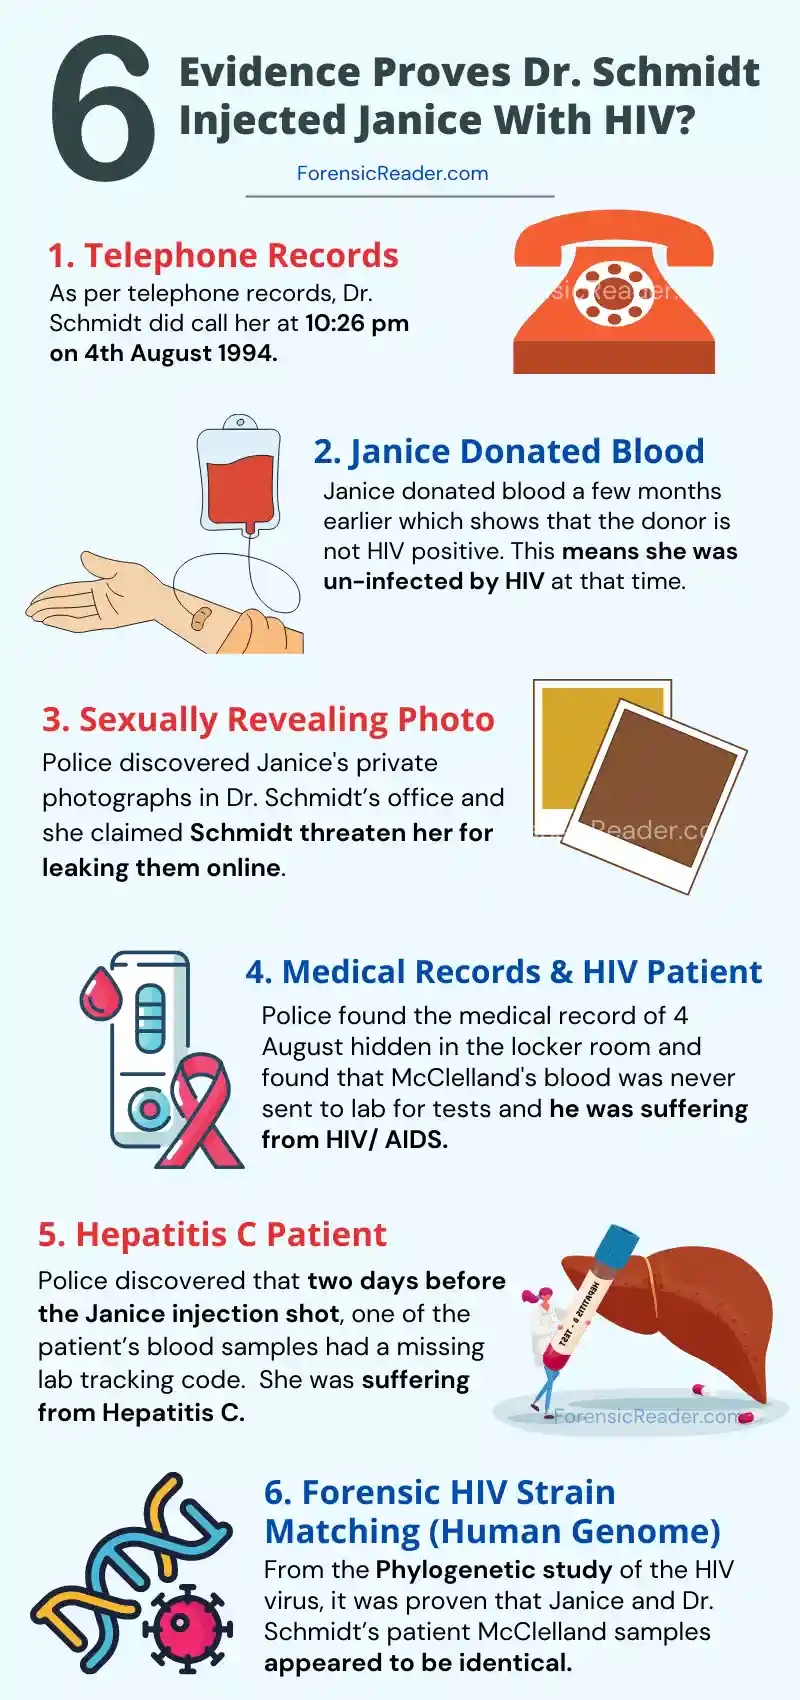 How it Was Proven Dr. Richard Schmidt Injected Janice With HIV